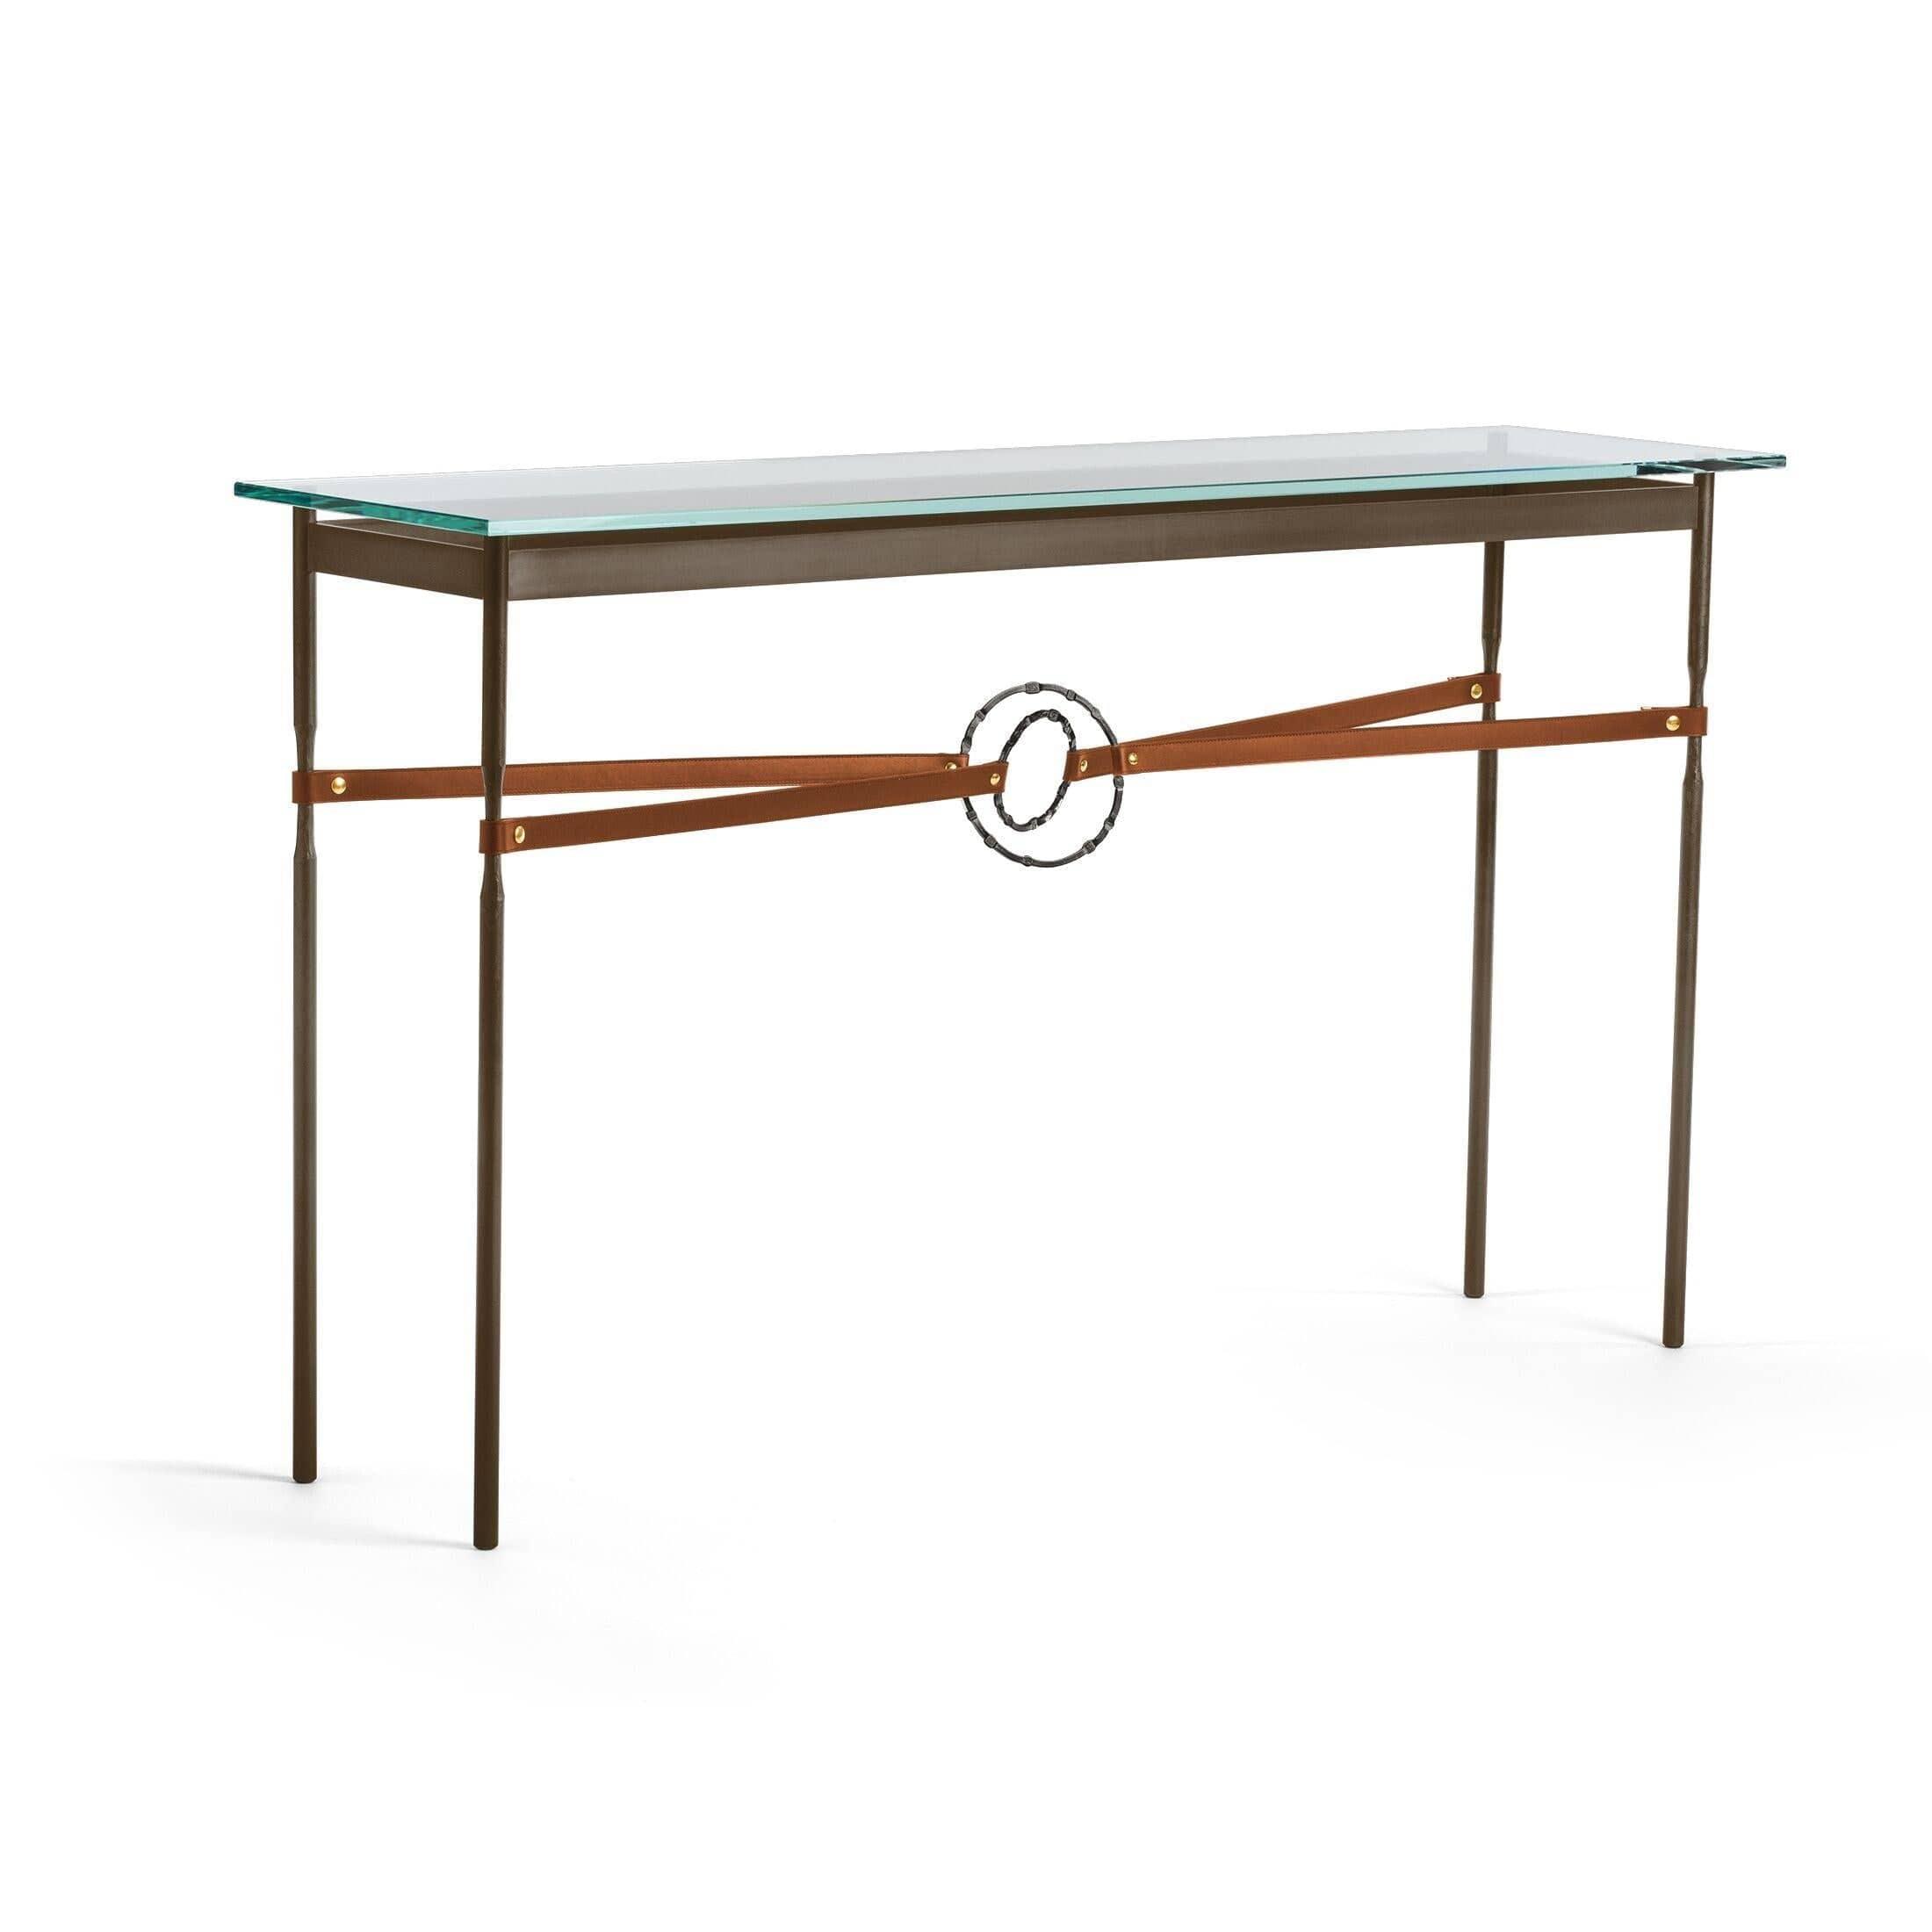 Hubbardton Forge - Equus Chestnut Leather Console Table - 750118-05-07-LC-VA0714 | Montreal Lighting & Hardware